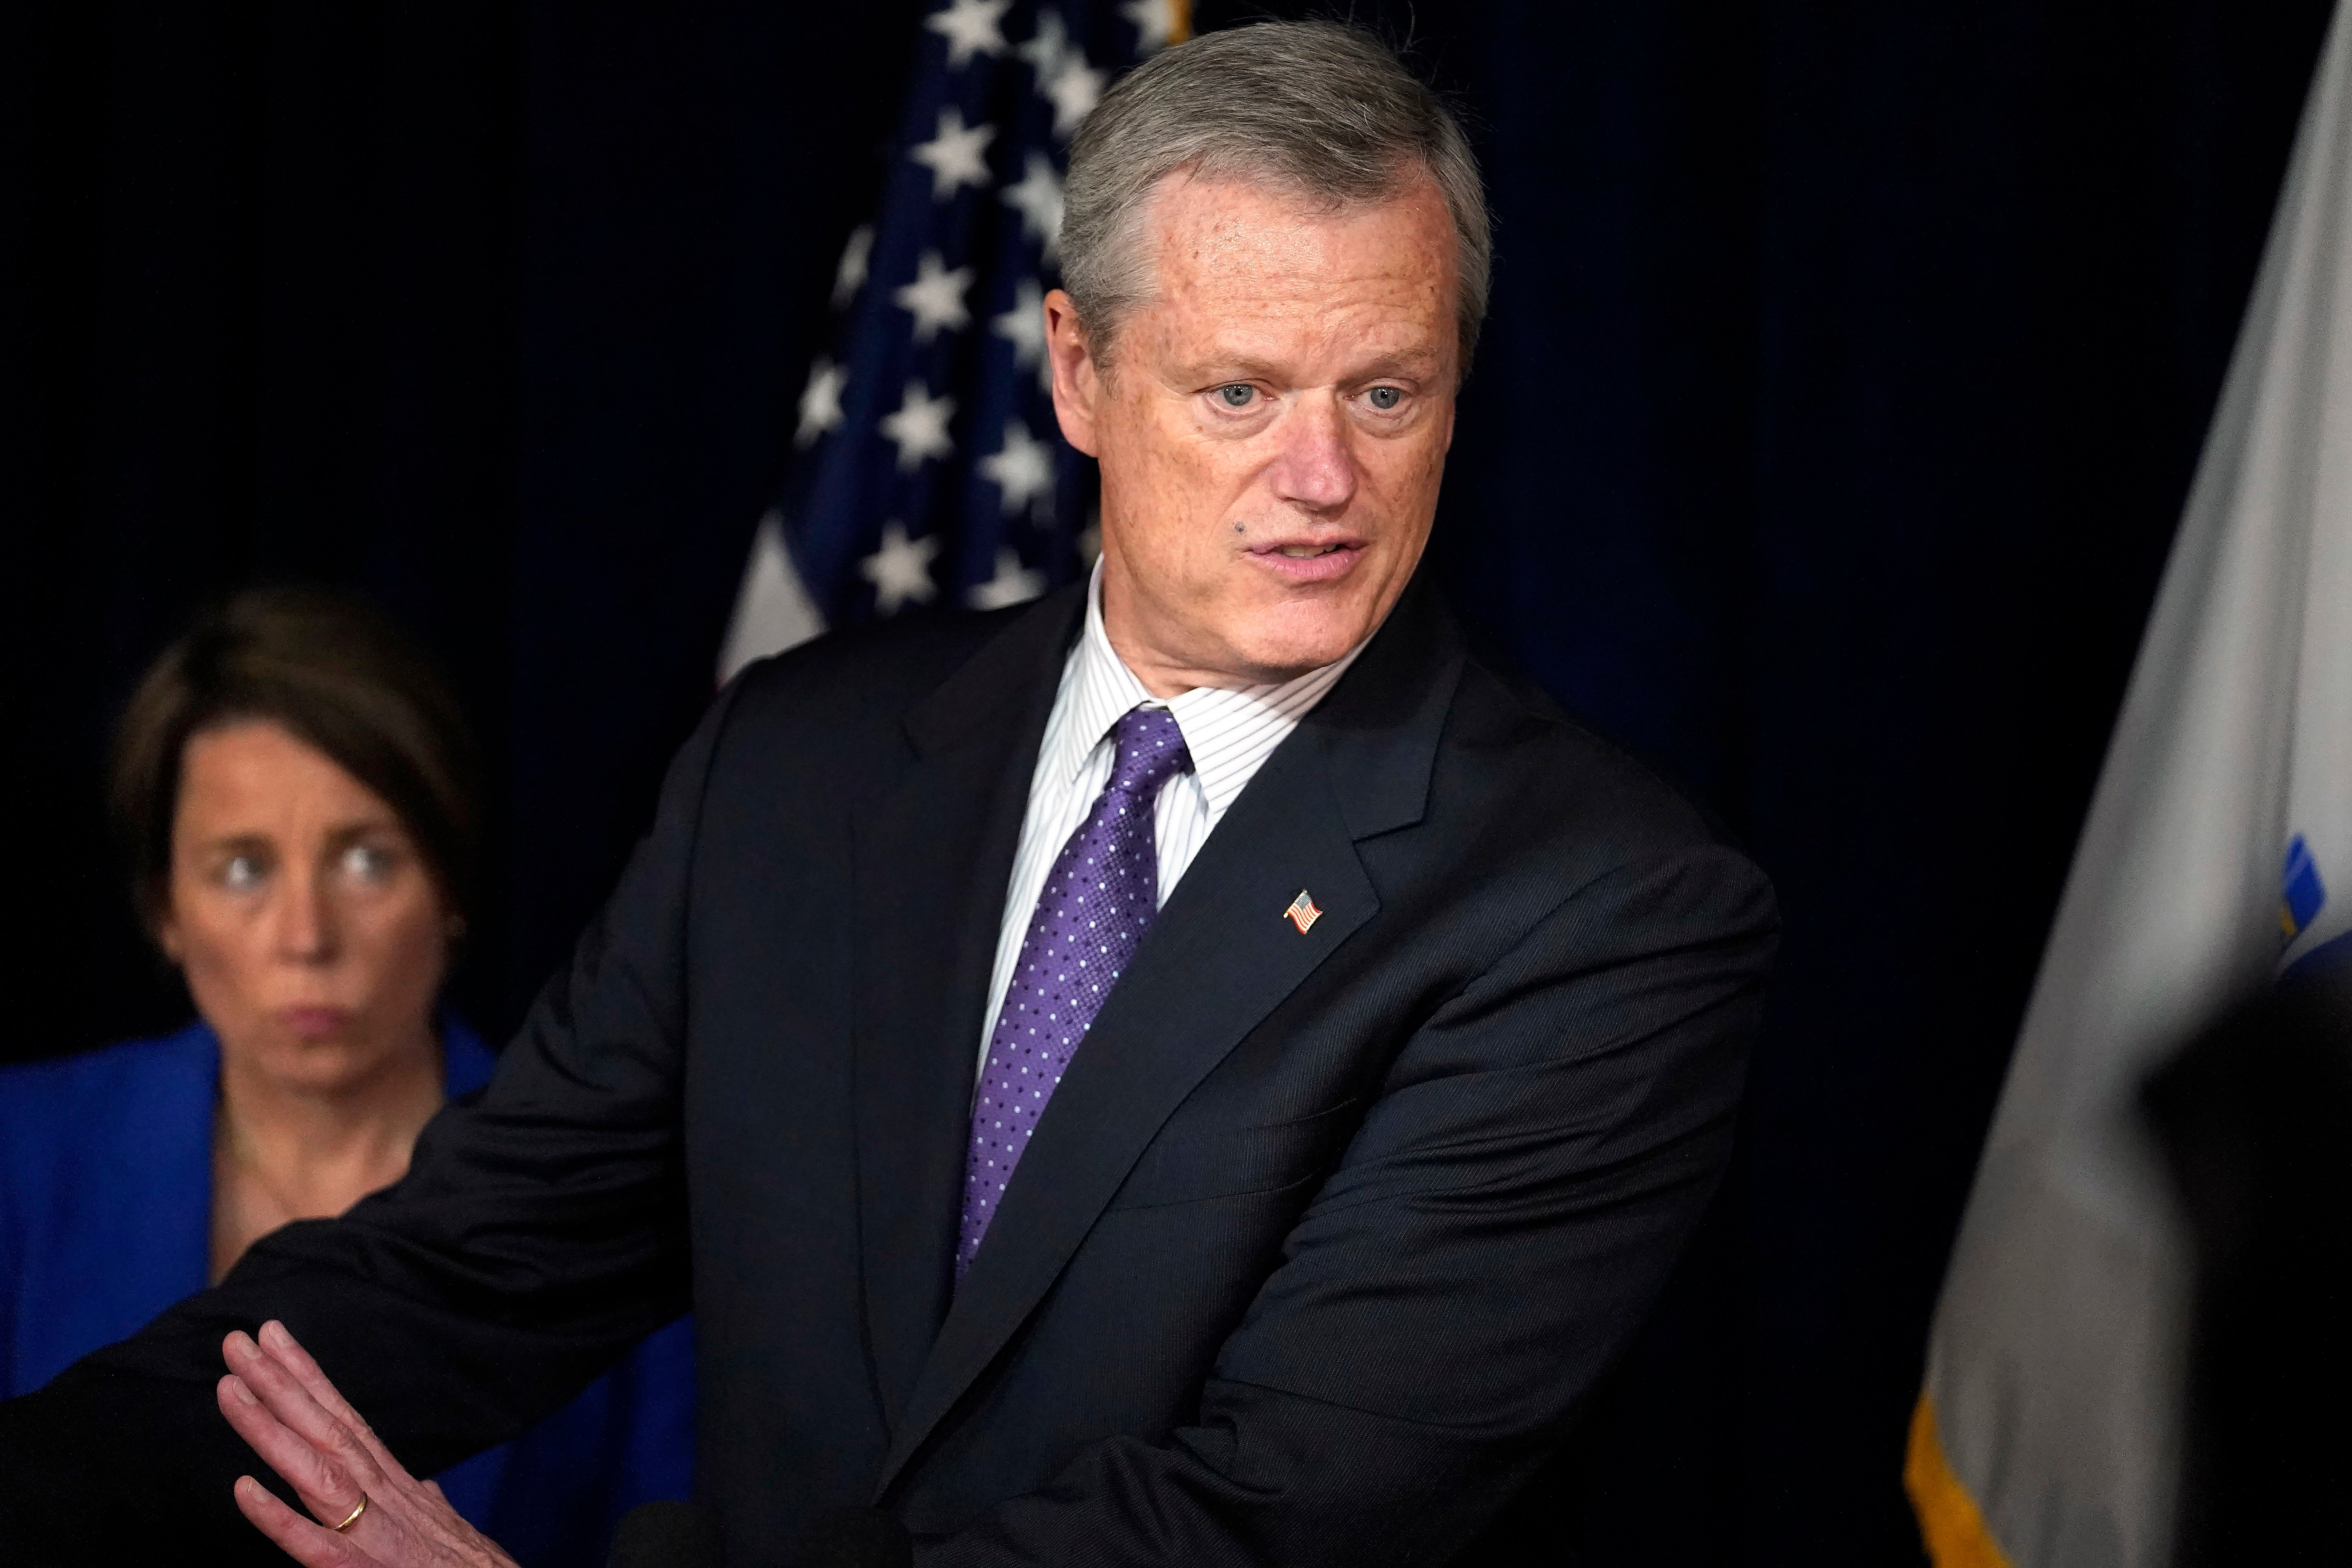 Massachusetts Governor Charlie Baker responded to Governor Sununu’s comments